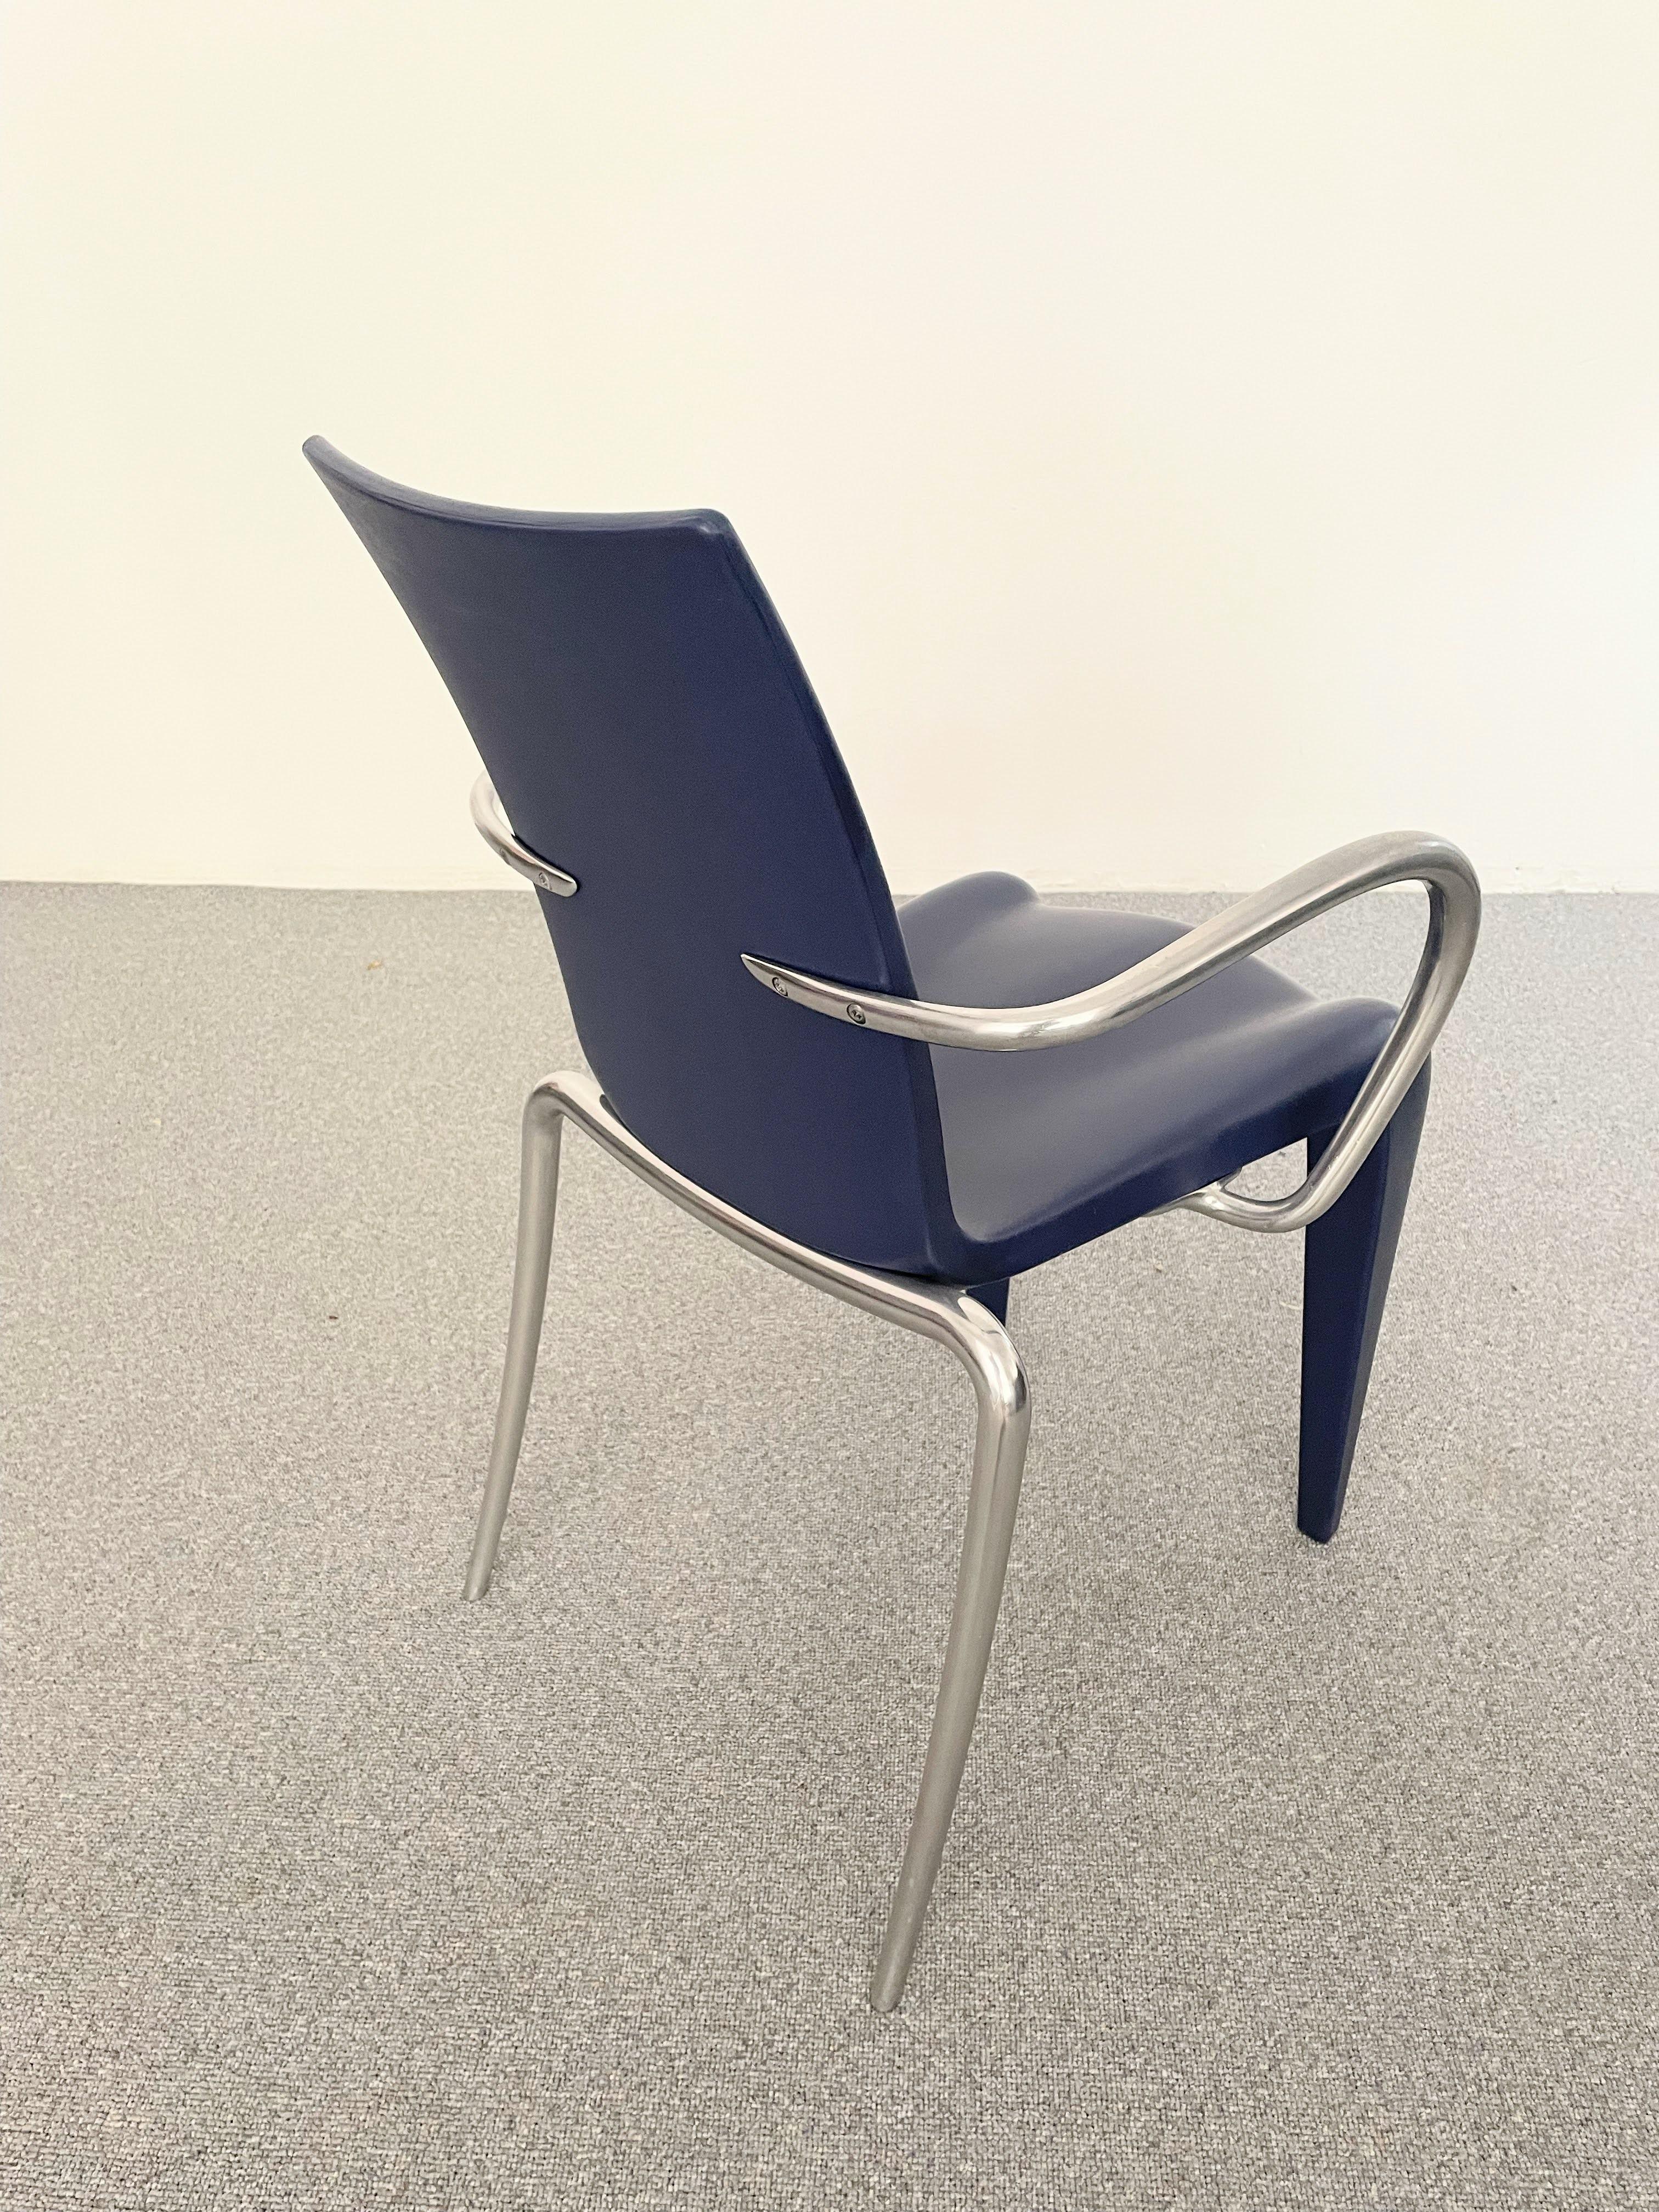 This chair is inspired by the feminine shape and has an exiting appearance. The chair has a simple construction with just 5 screws and consists of 2 parts. The chair is in very good vintage condition and has all marking under the seat (number and